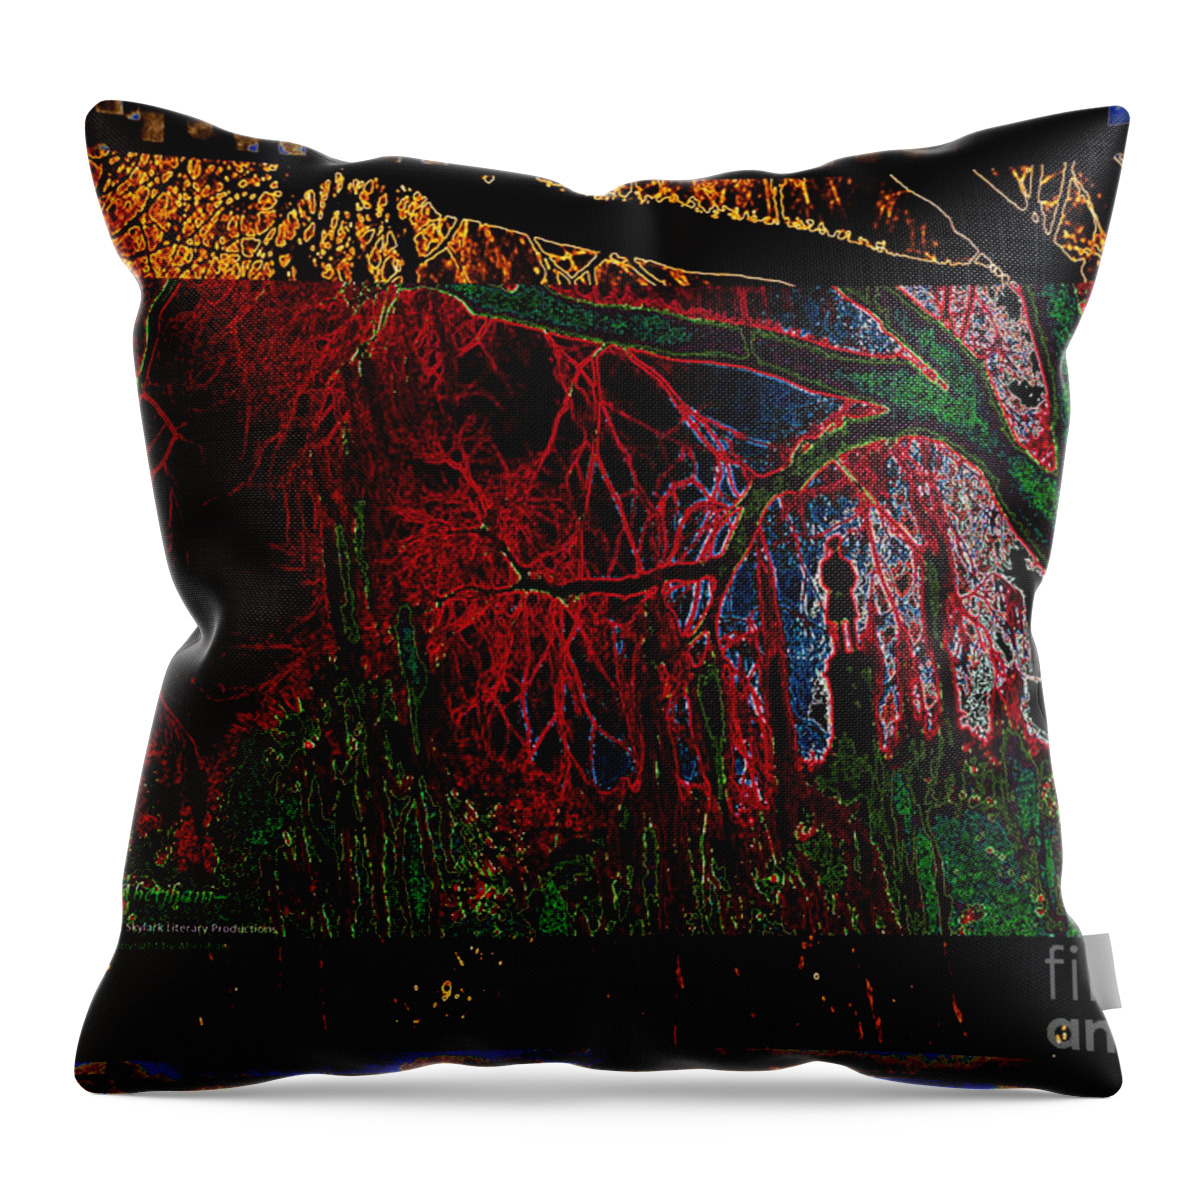 American Monuments Throw Pillow featuring the digital art Southern Trees and the Strange Fruit They Bear No. 1 by Aberjhani's Official Postered Chromatic Poetics